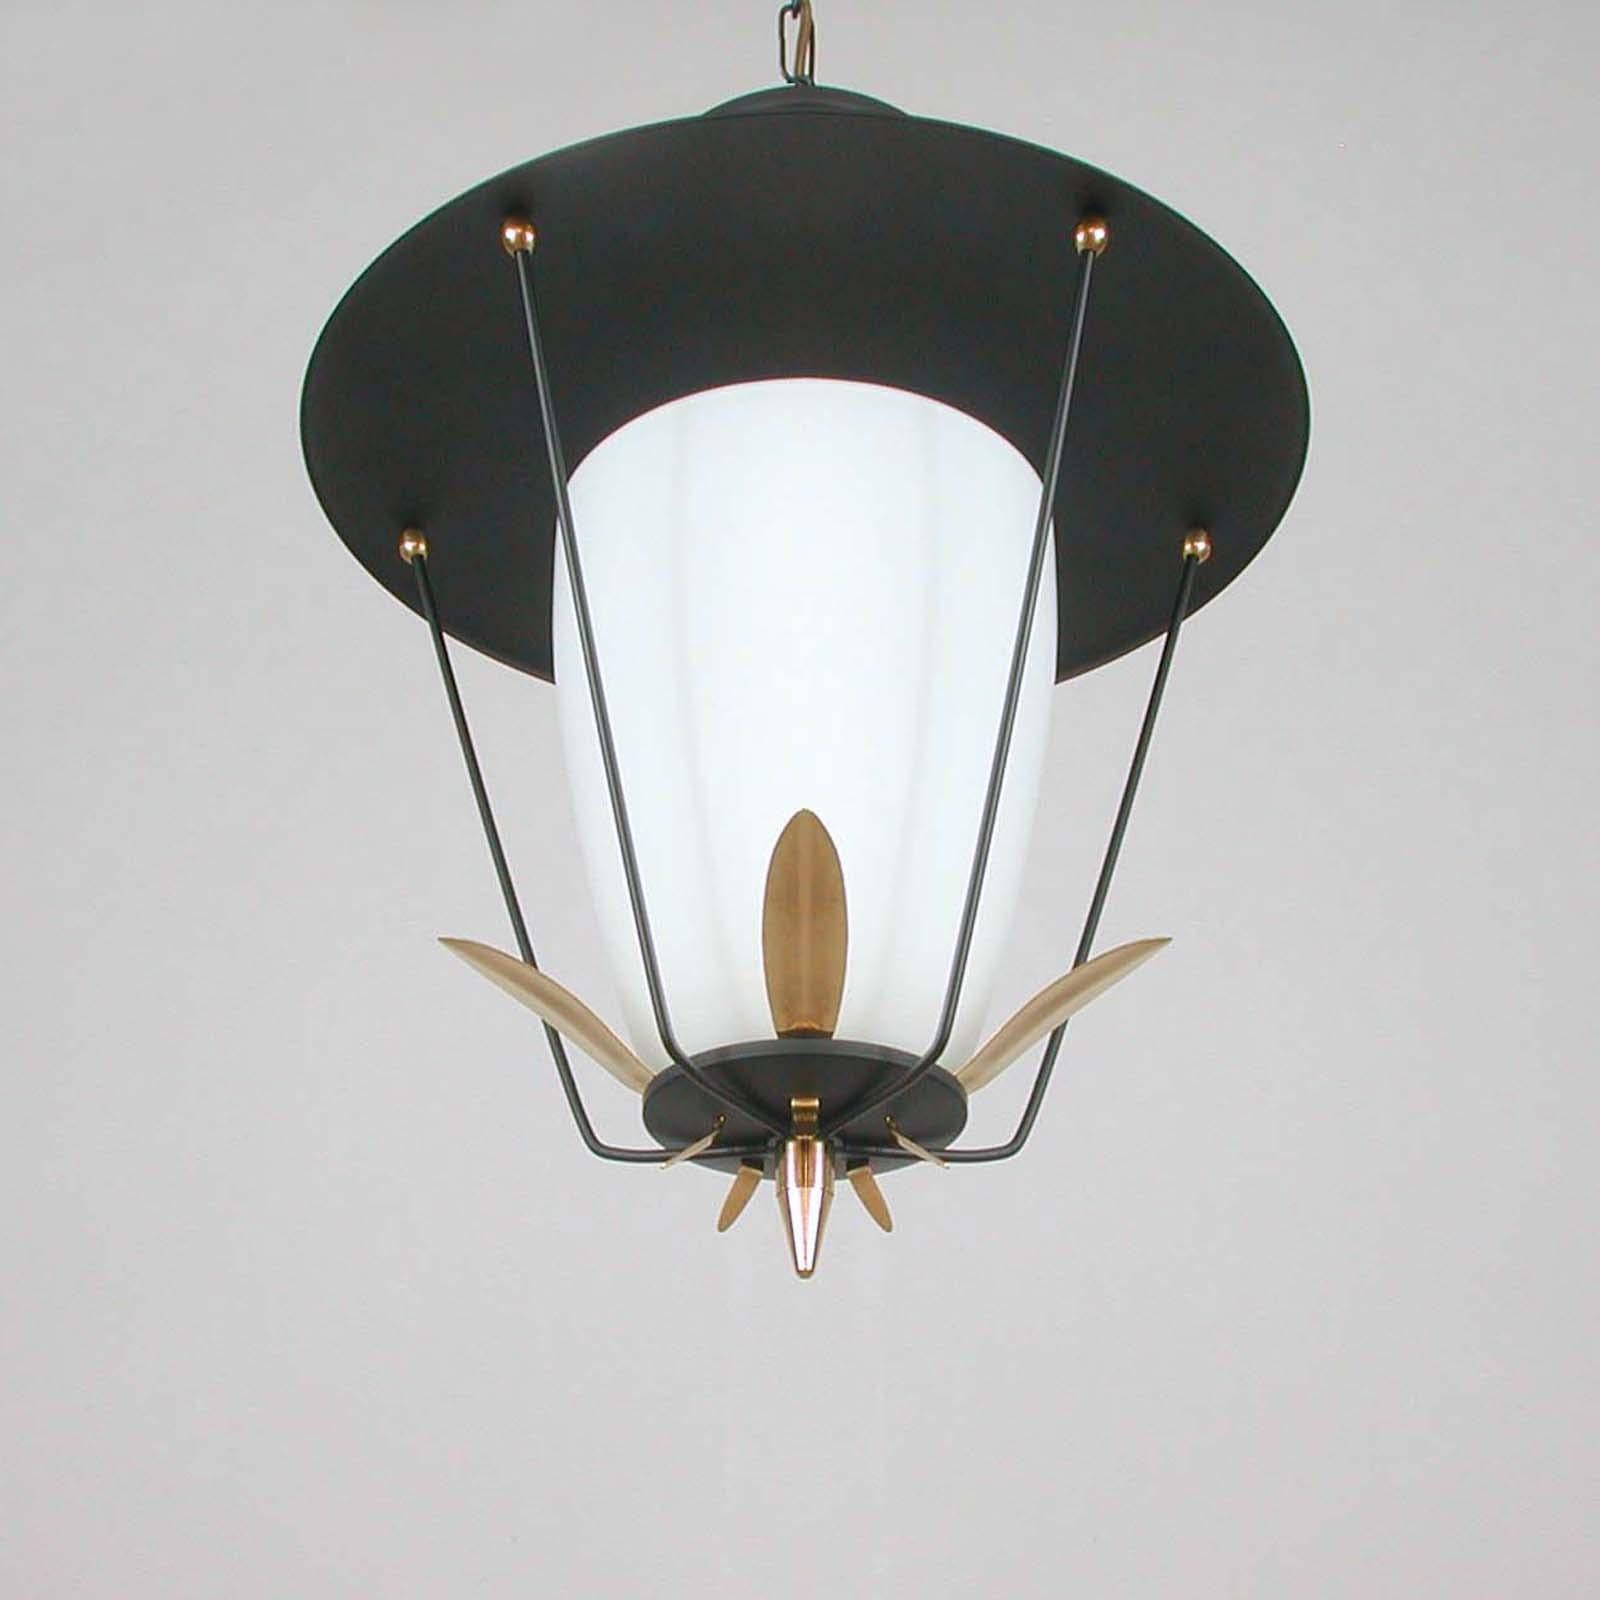 Mid-20th Century Midcentury French Black and White Lantern with Brass Details, 1950s